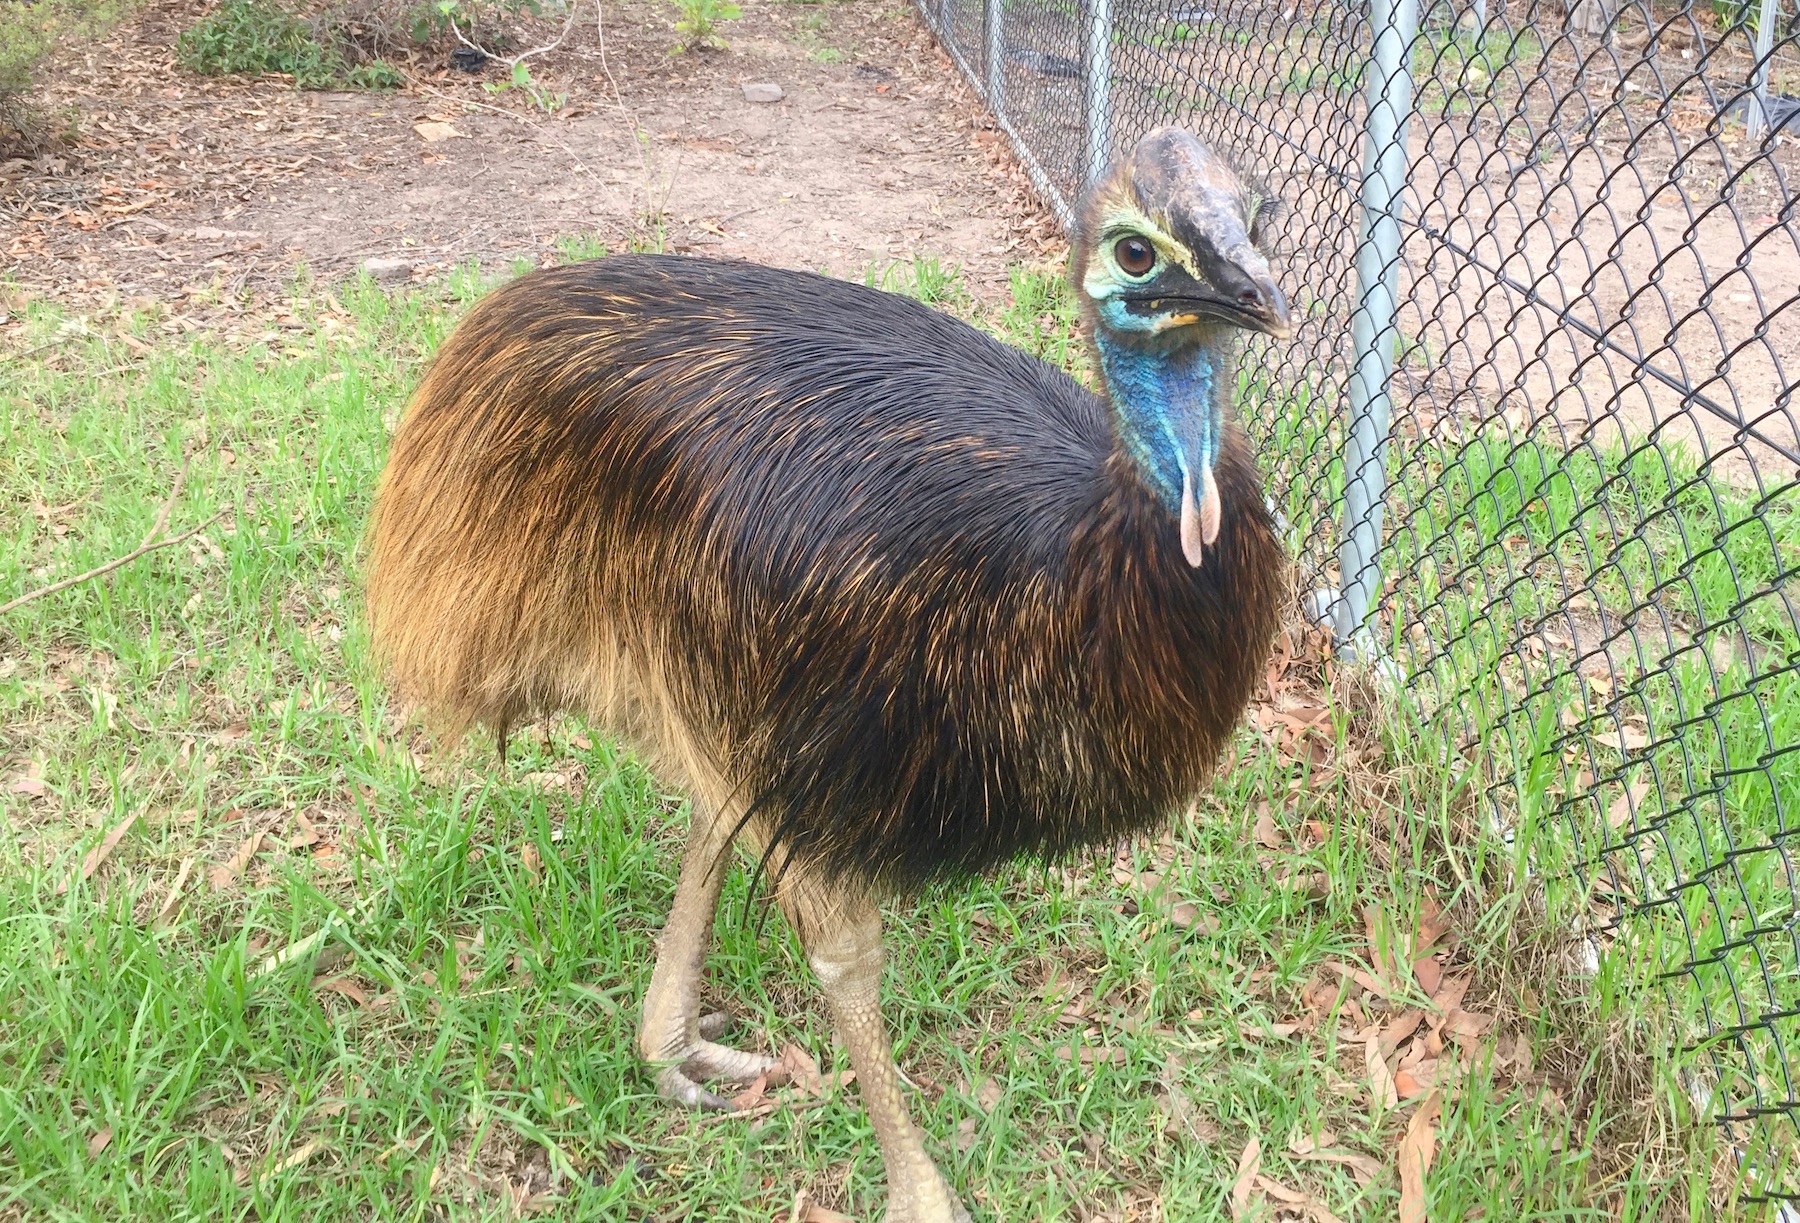 A bittersweet announcement for Tathra's two beloved cassowaries - Kyabram here they come